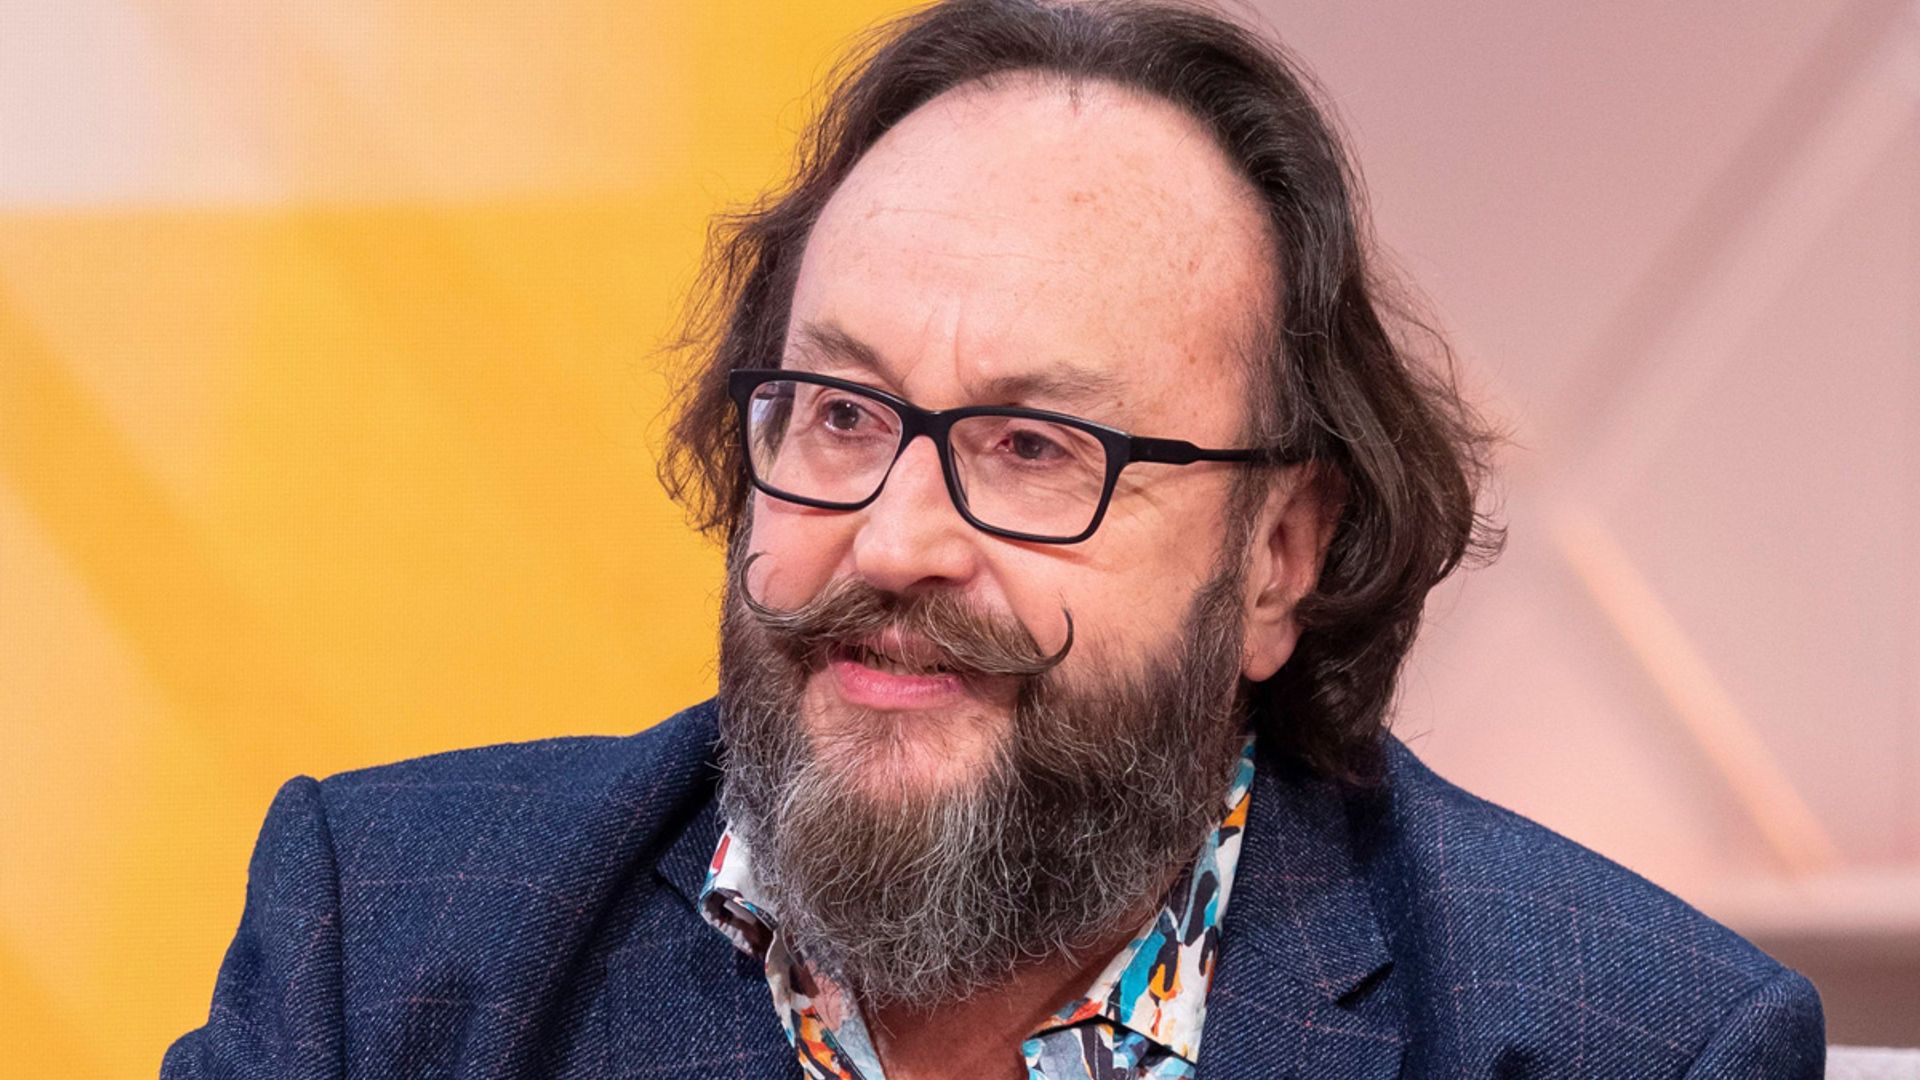 Hairy Bikers star Dave Myers' rare appearance amid cancer battle leaves fans emotional